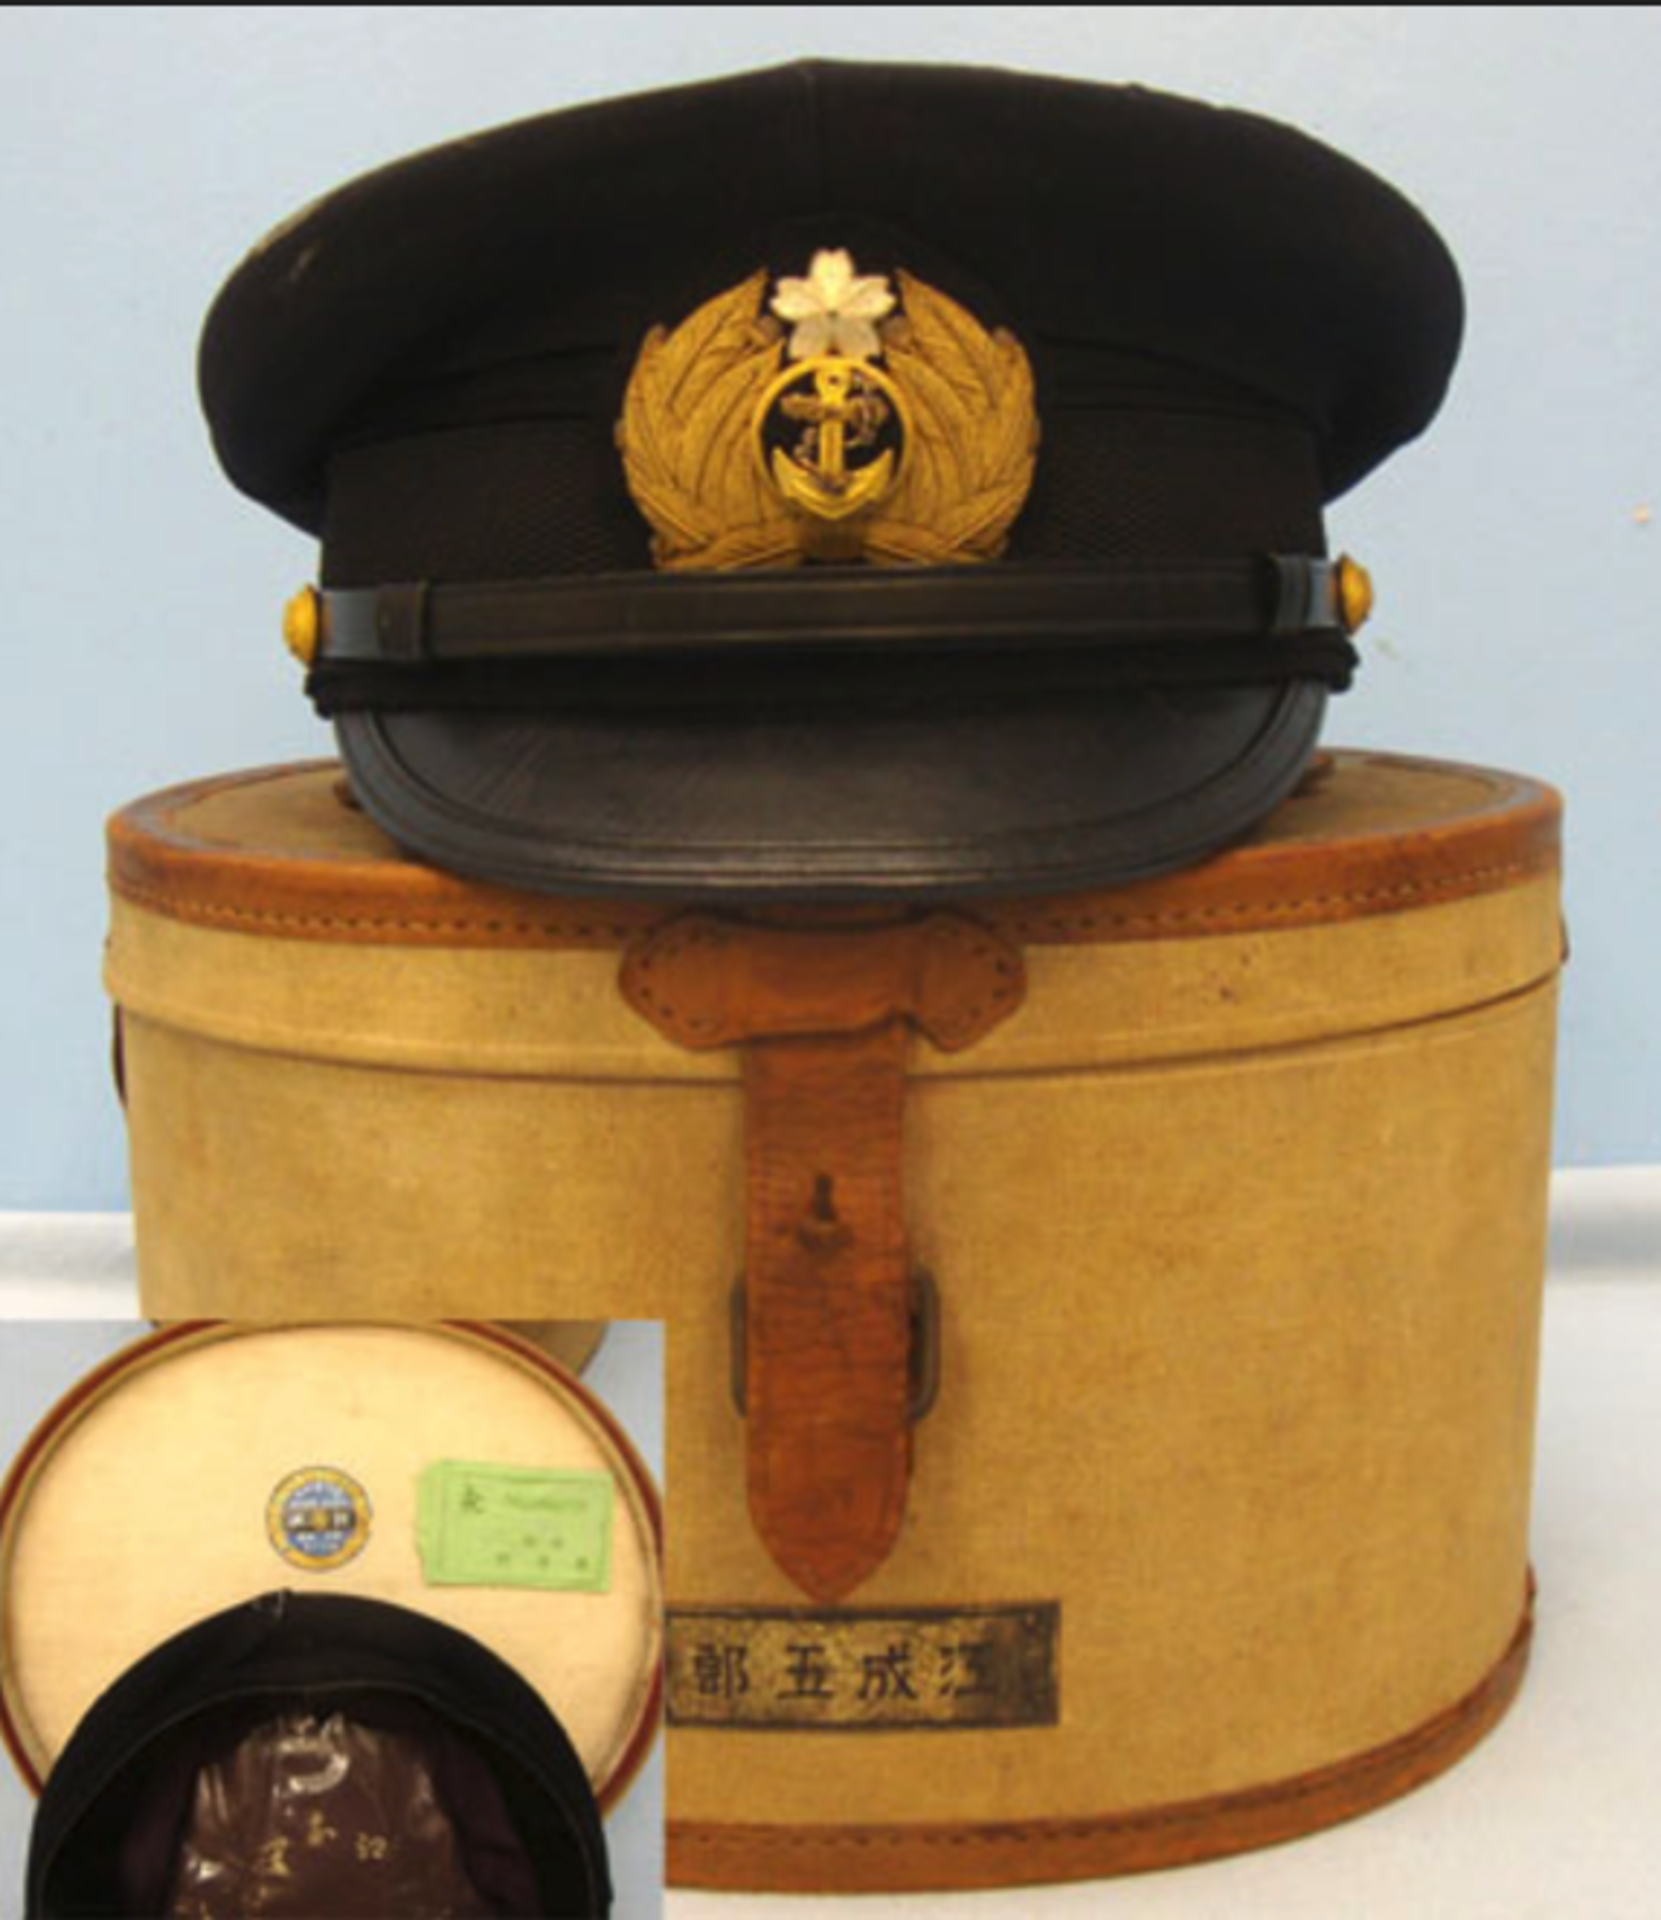 WW2 Japanese Naval Officer's Visor Cap with Bullion Badge in Original Lined Carry Box - Image 3 of 3